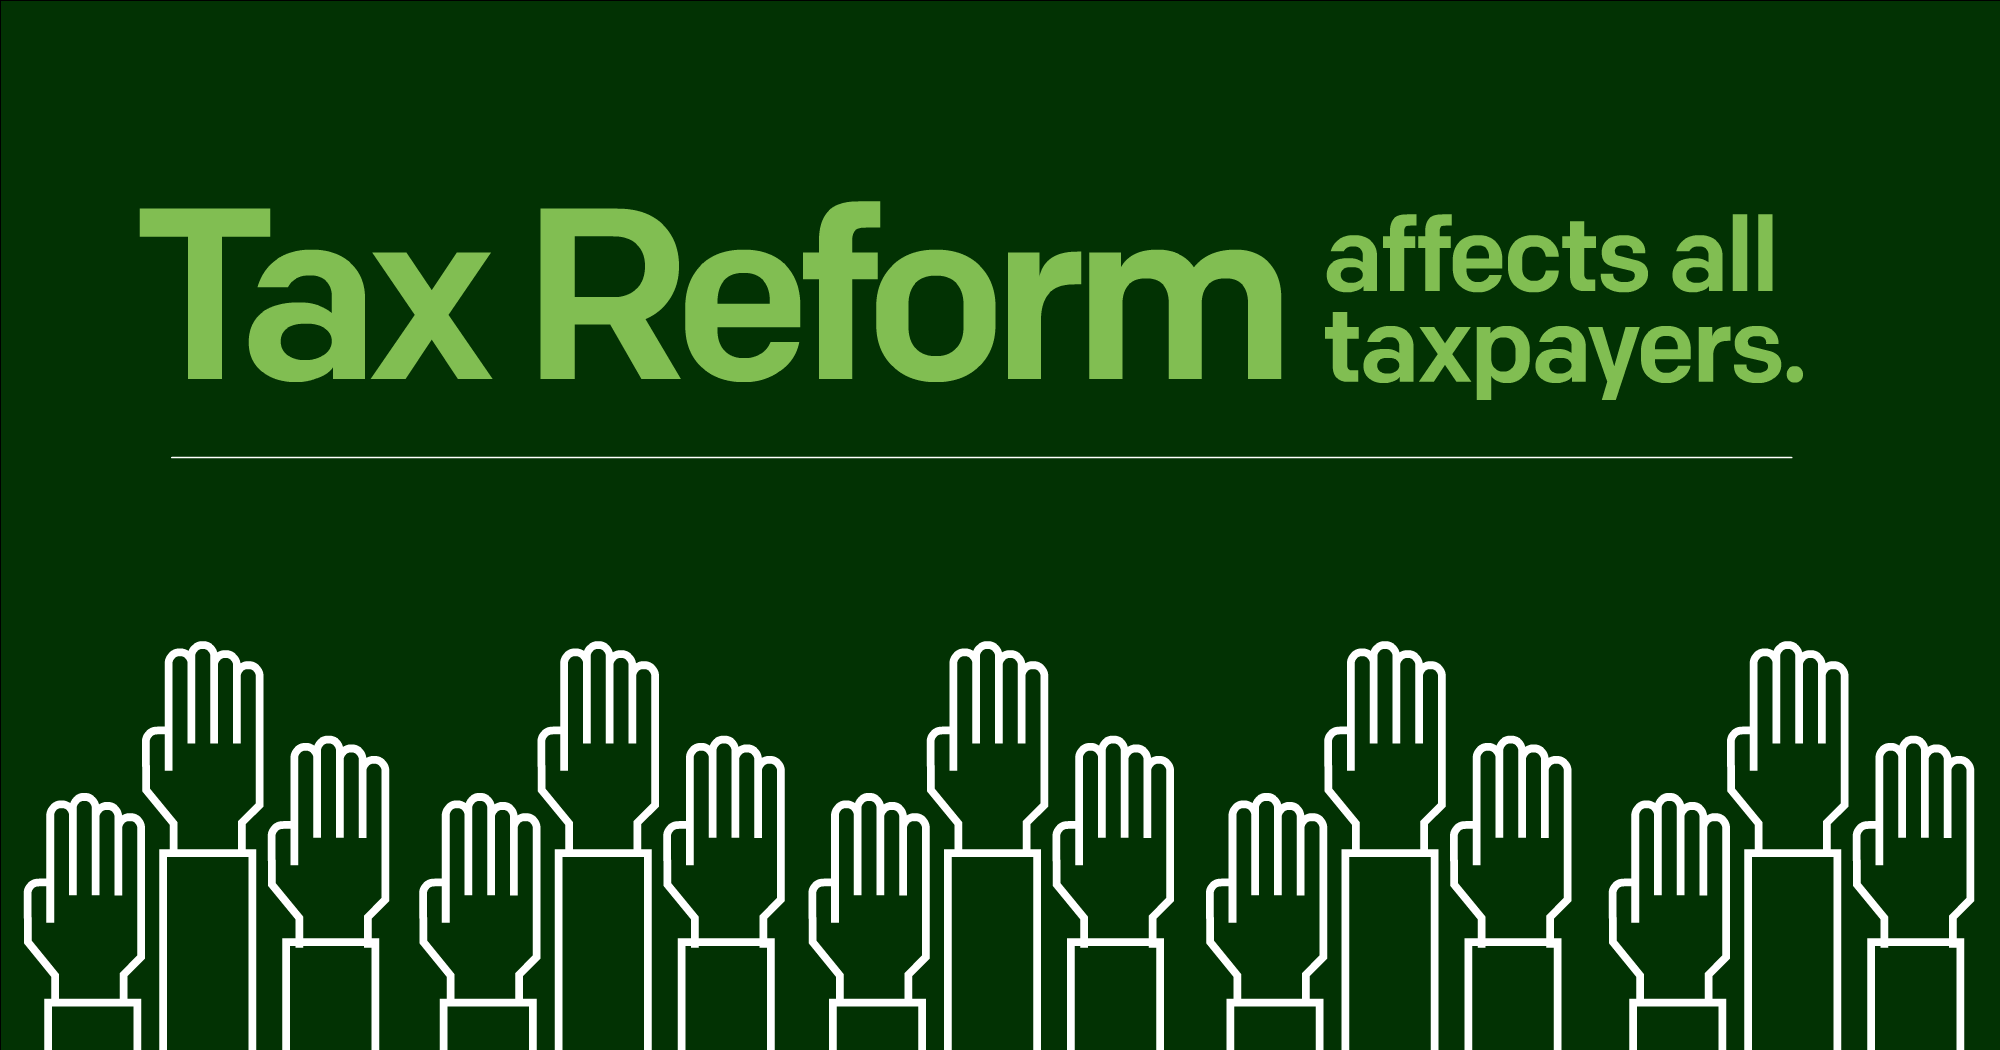 How does tax reform affect you?